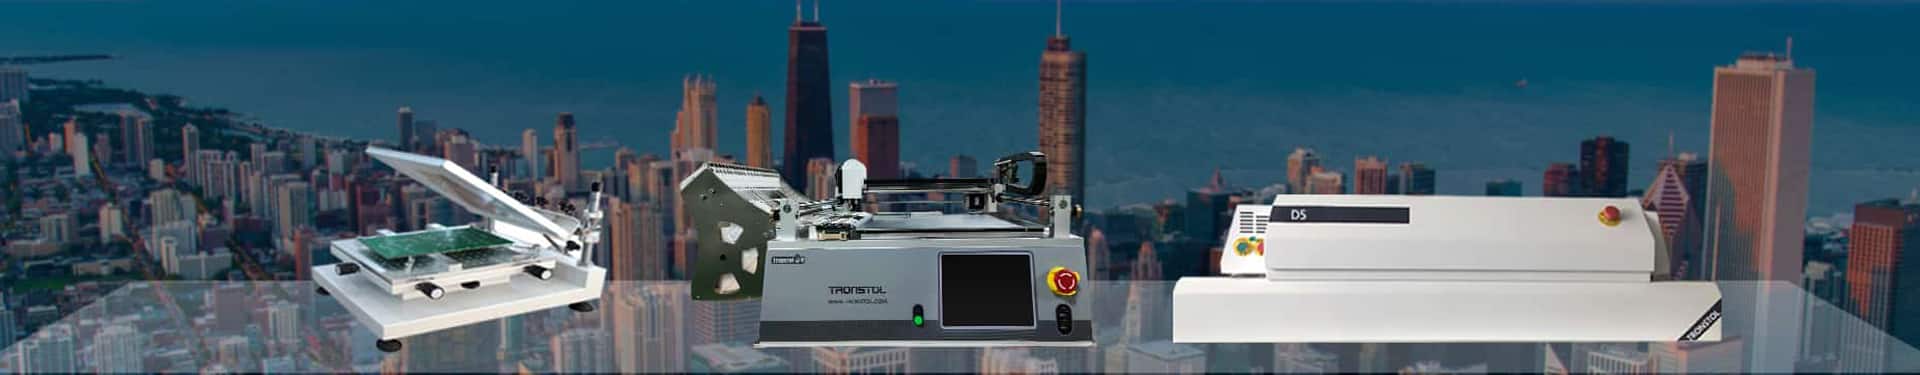 Tronstol 3V (Advanced) pick and place machine Line 2